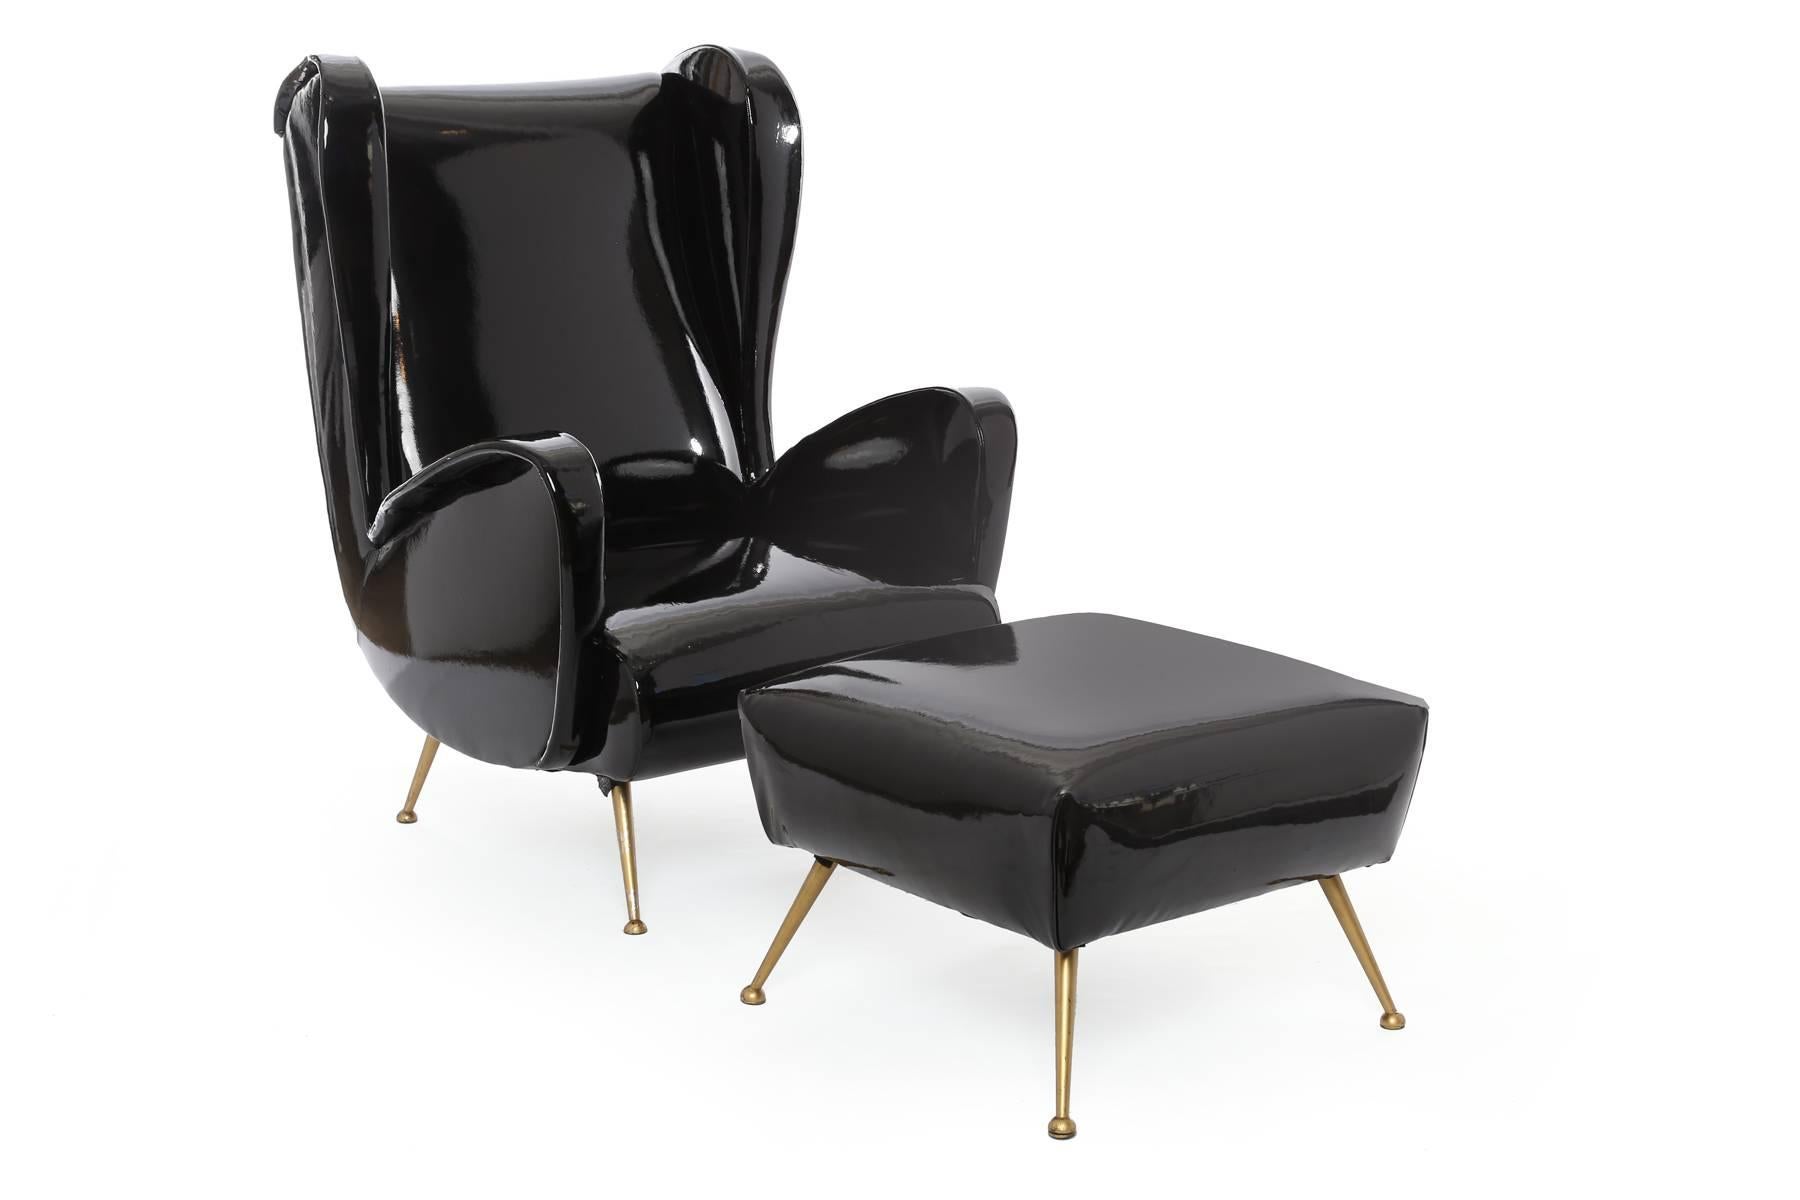 Chic pair of patent leather and brass Italian armchairs, circa late 1950s. These lovely examples are upholstered in a black patent leather and have sculptural arms and sides with splayed brass legs. Ottoman measures: 14.5